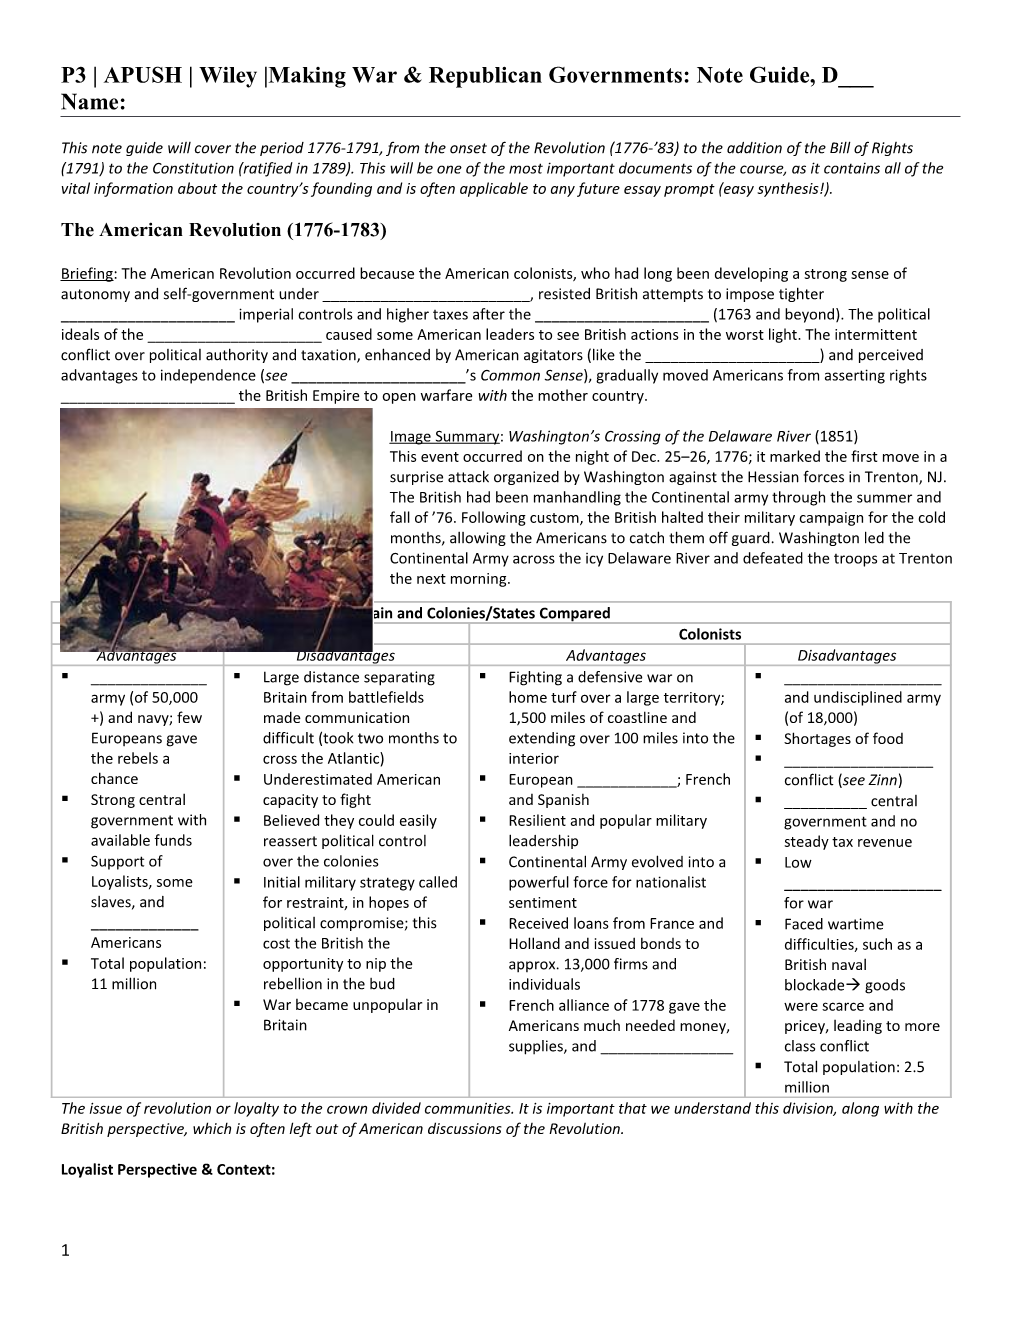 P3 APUSH Wiley Making War & Republican Governments: Note Guide, D___ Name